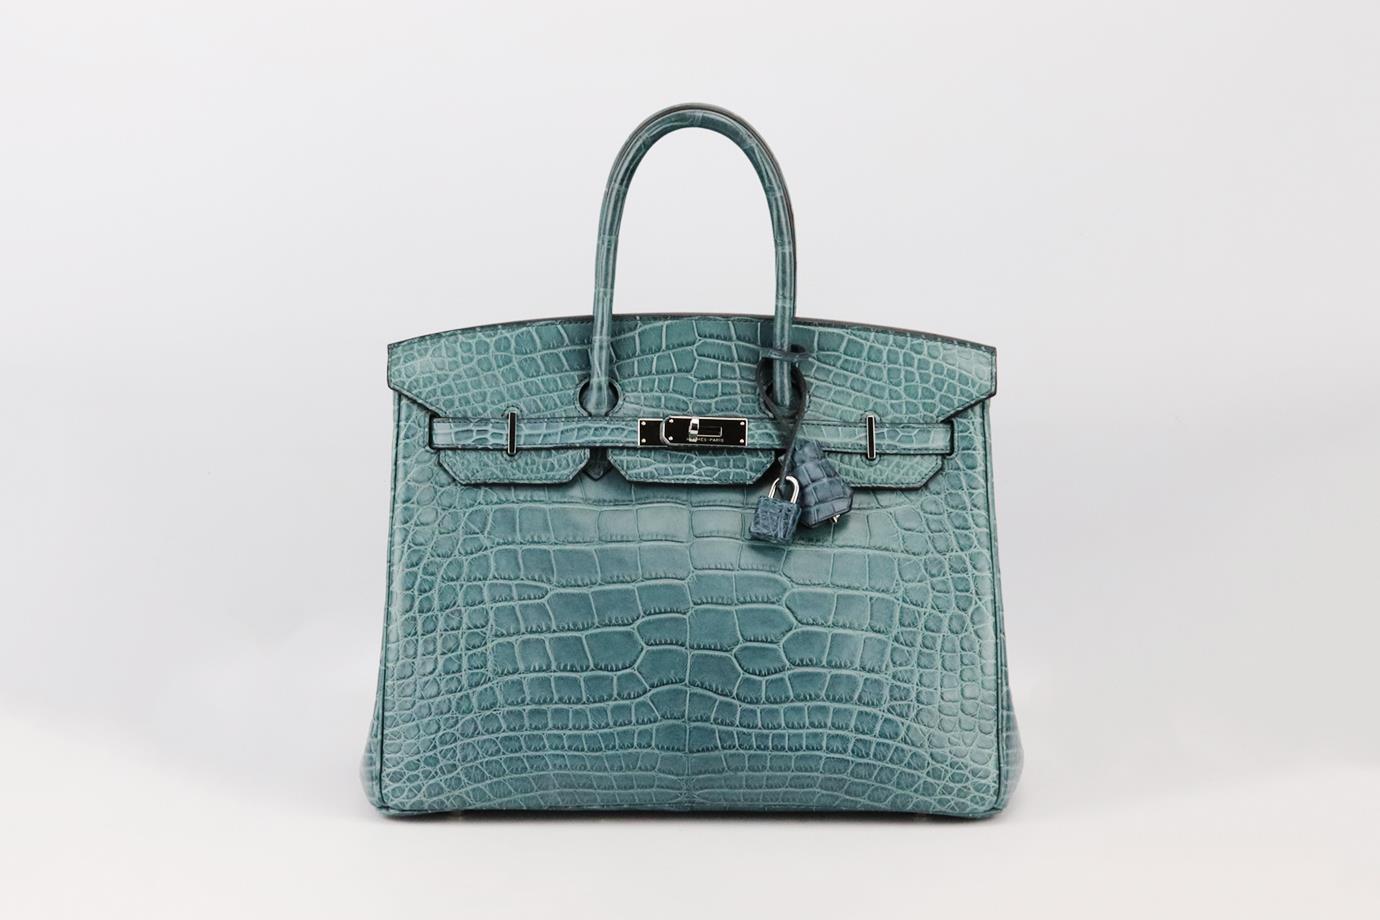 Hermès 2013 Birkin 35cm Matte Alligator Mississippiensis leather bag. Made in France, this beautiful 2013 Hermès ‘Birkin’ handbag has been made from blue-tone ‘Alligator Mississippiensis’ exterior in ‘Tempete’ with matching leather interior, this